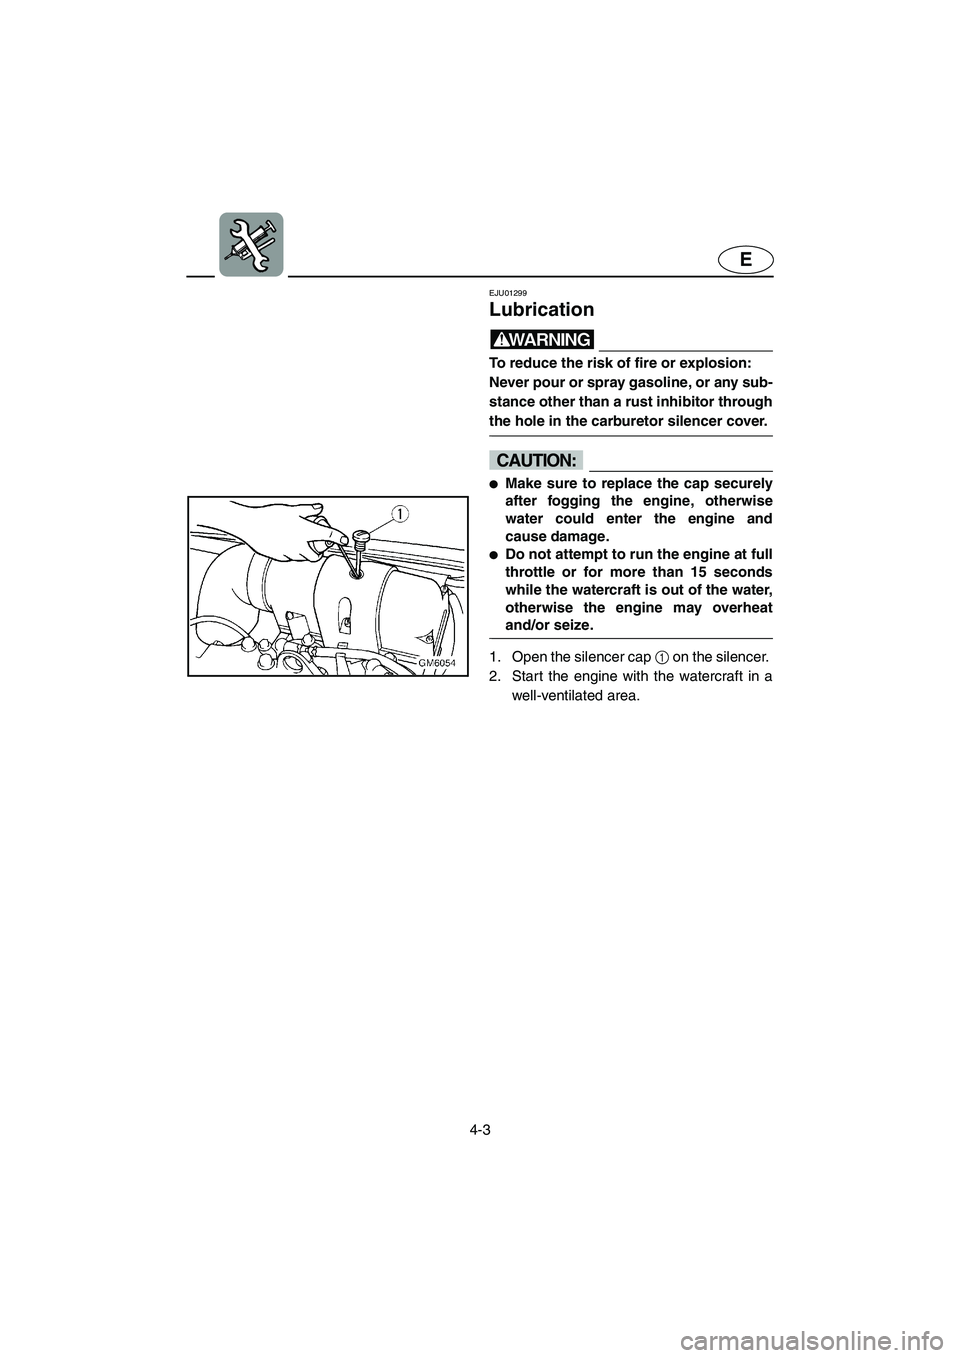 YAMAHA SUPERJET 2002  Owners Manual 4-3
E
EJU01299 
Lubrication  
WARNING@ To reduce the risk of fire or explosion: 
Never pour or spray gasoline, or any sub-
stance other than a rust inhibitor through
the hole in the carburetor silence